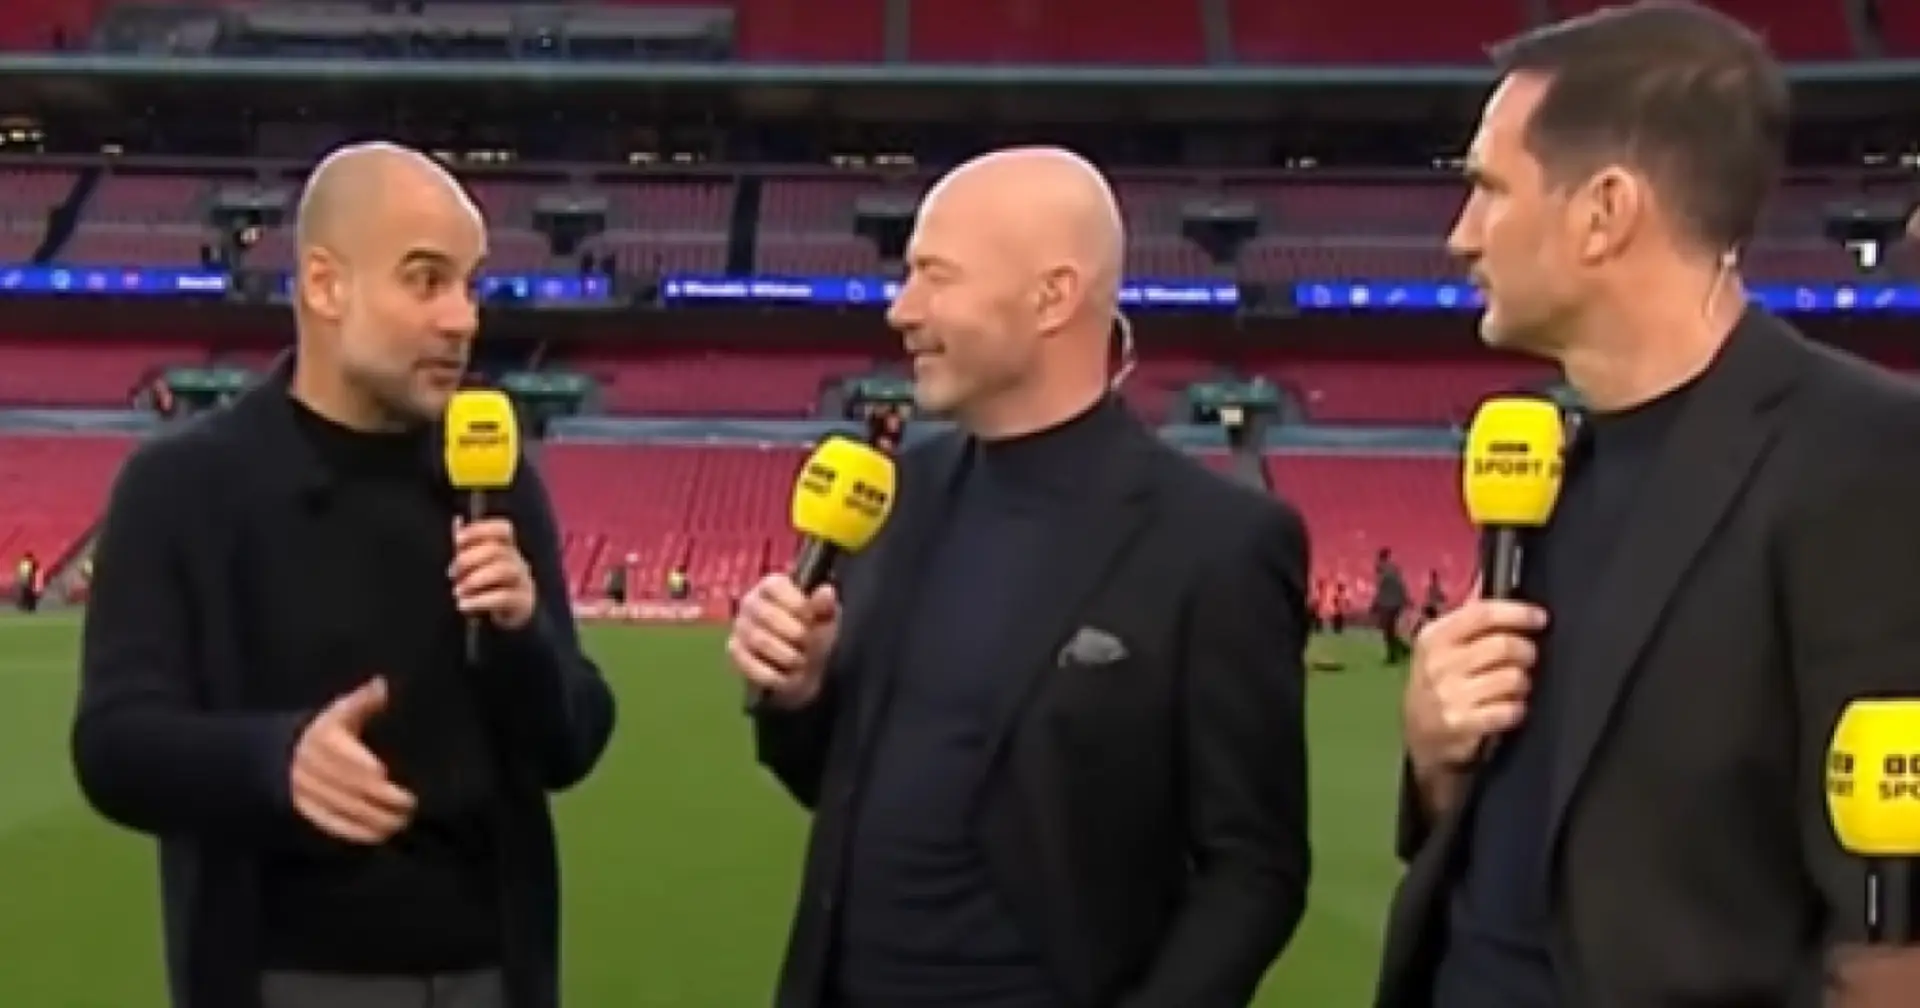 Alan Shearer slams FA for poor communication over ending FA Cup replays